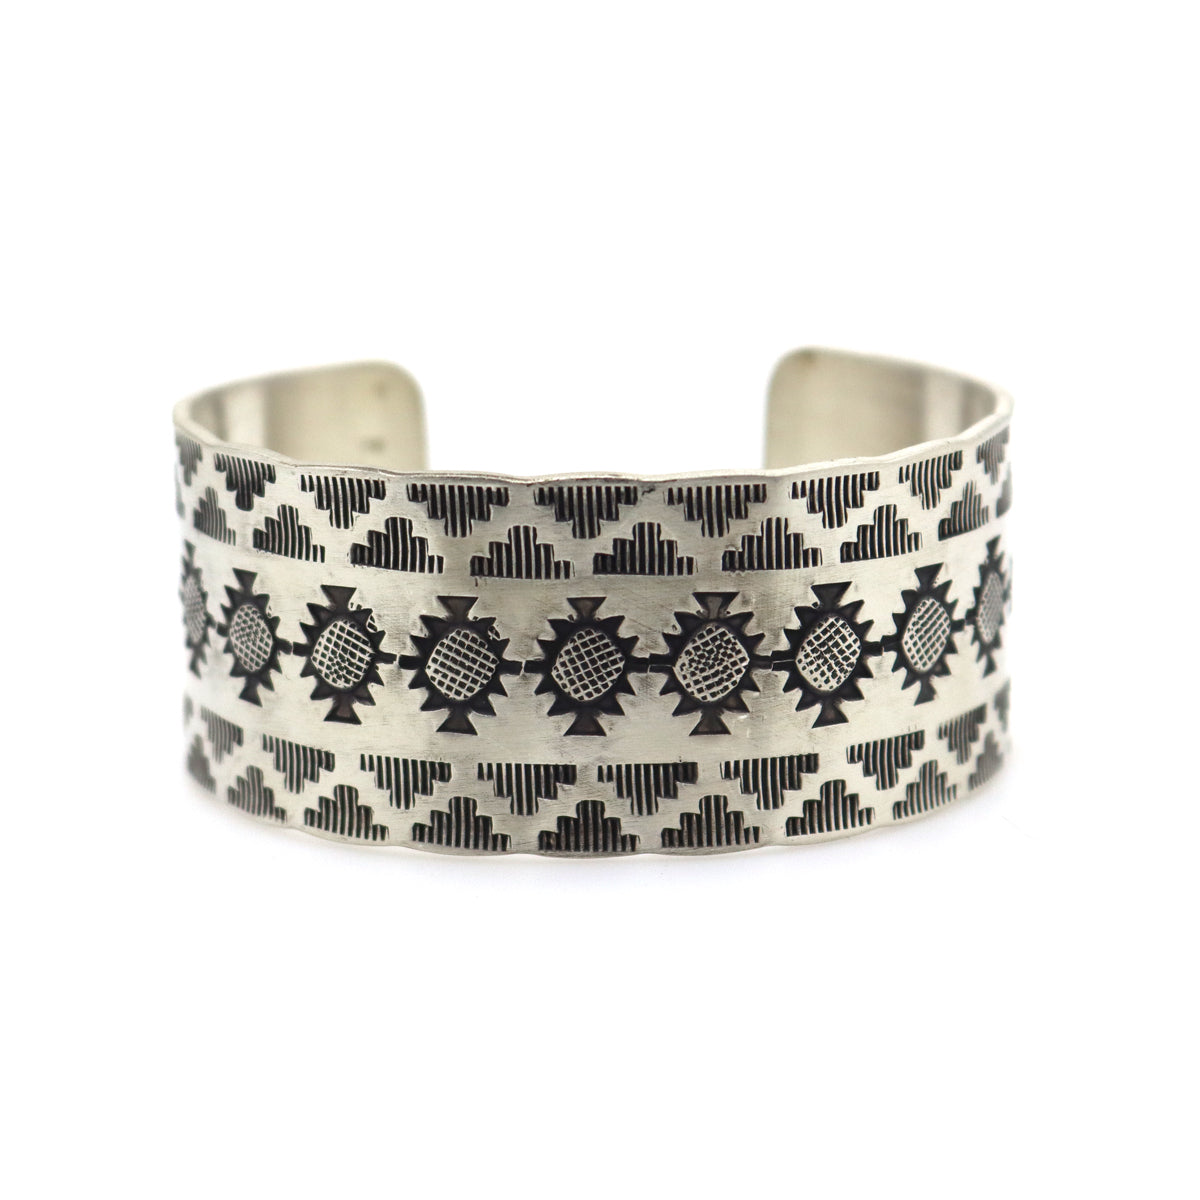 Roland Begay - Navajo Contemporary Sterling Silver Bracelet with Stamped Design, size 6.5 (J13538)
